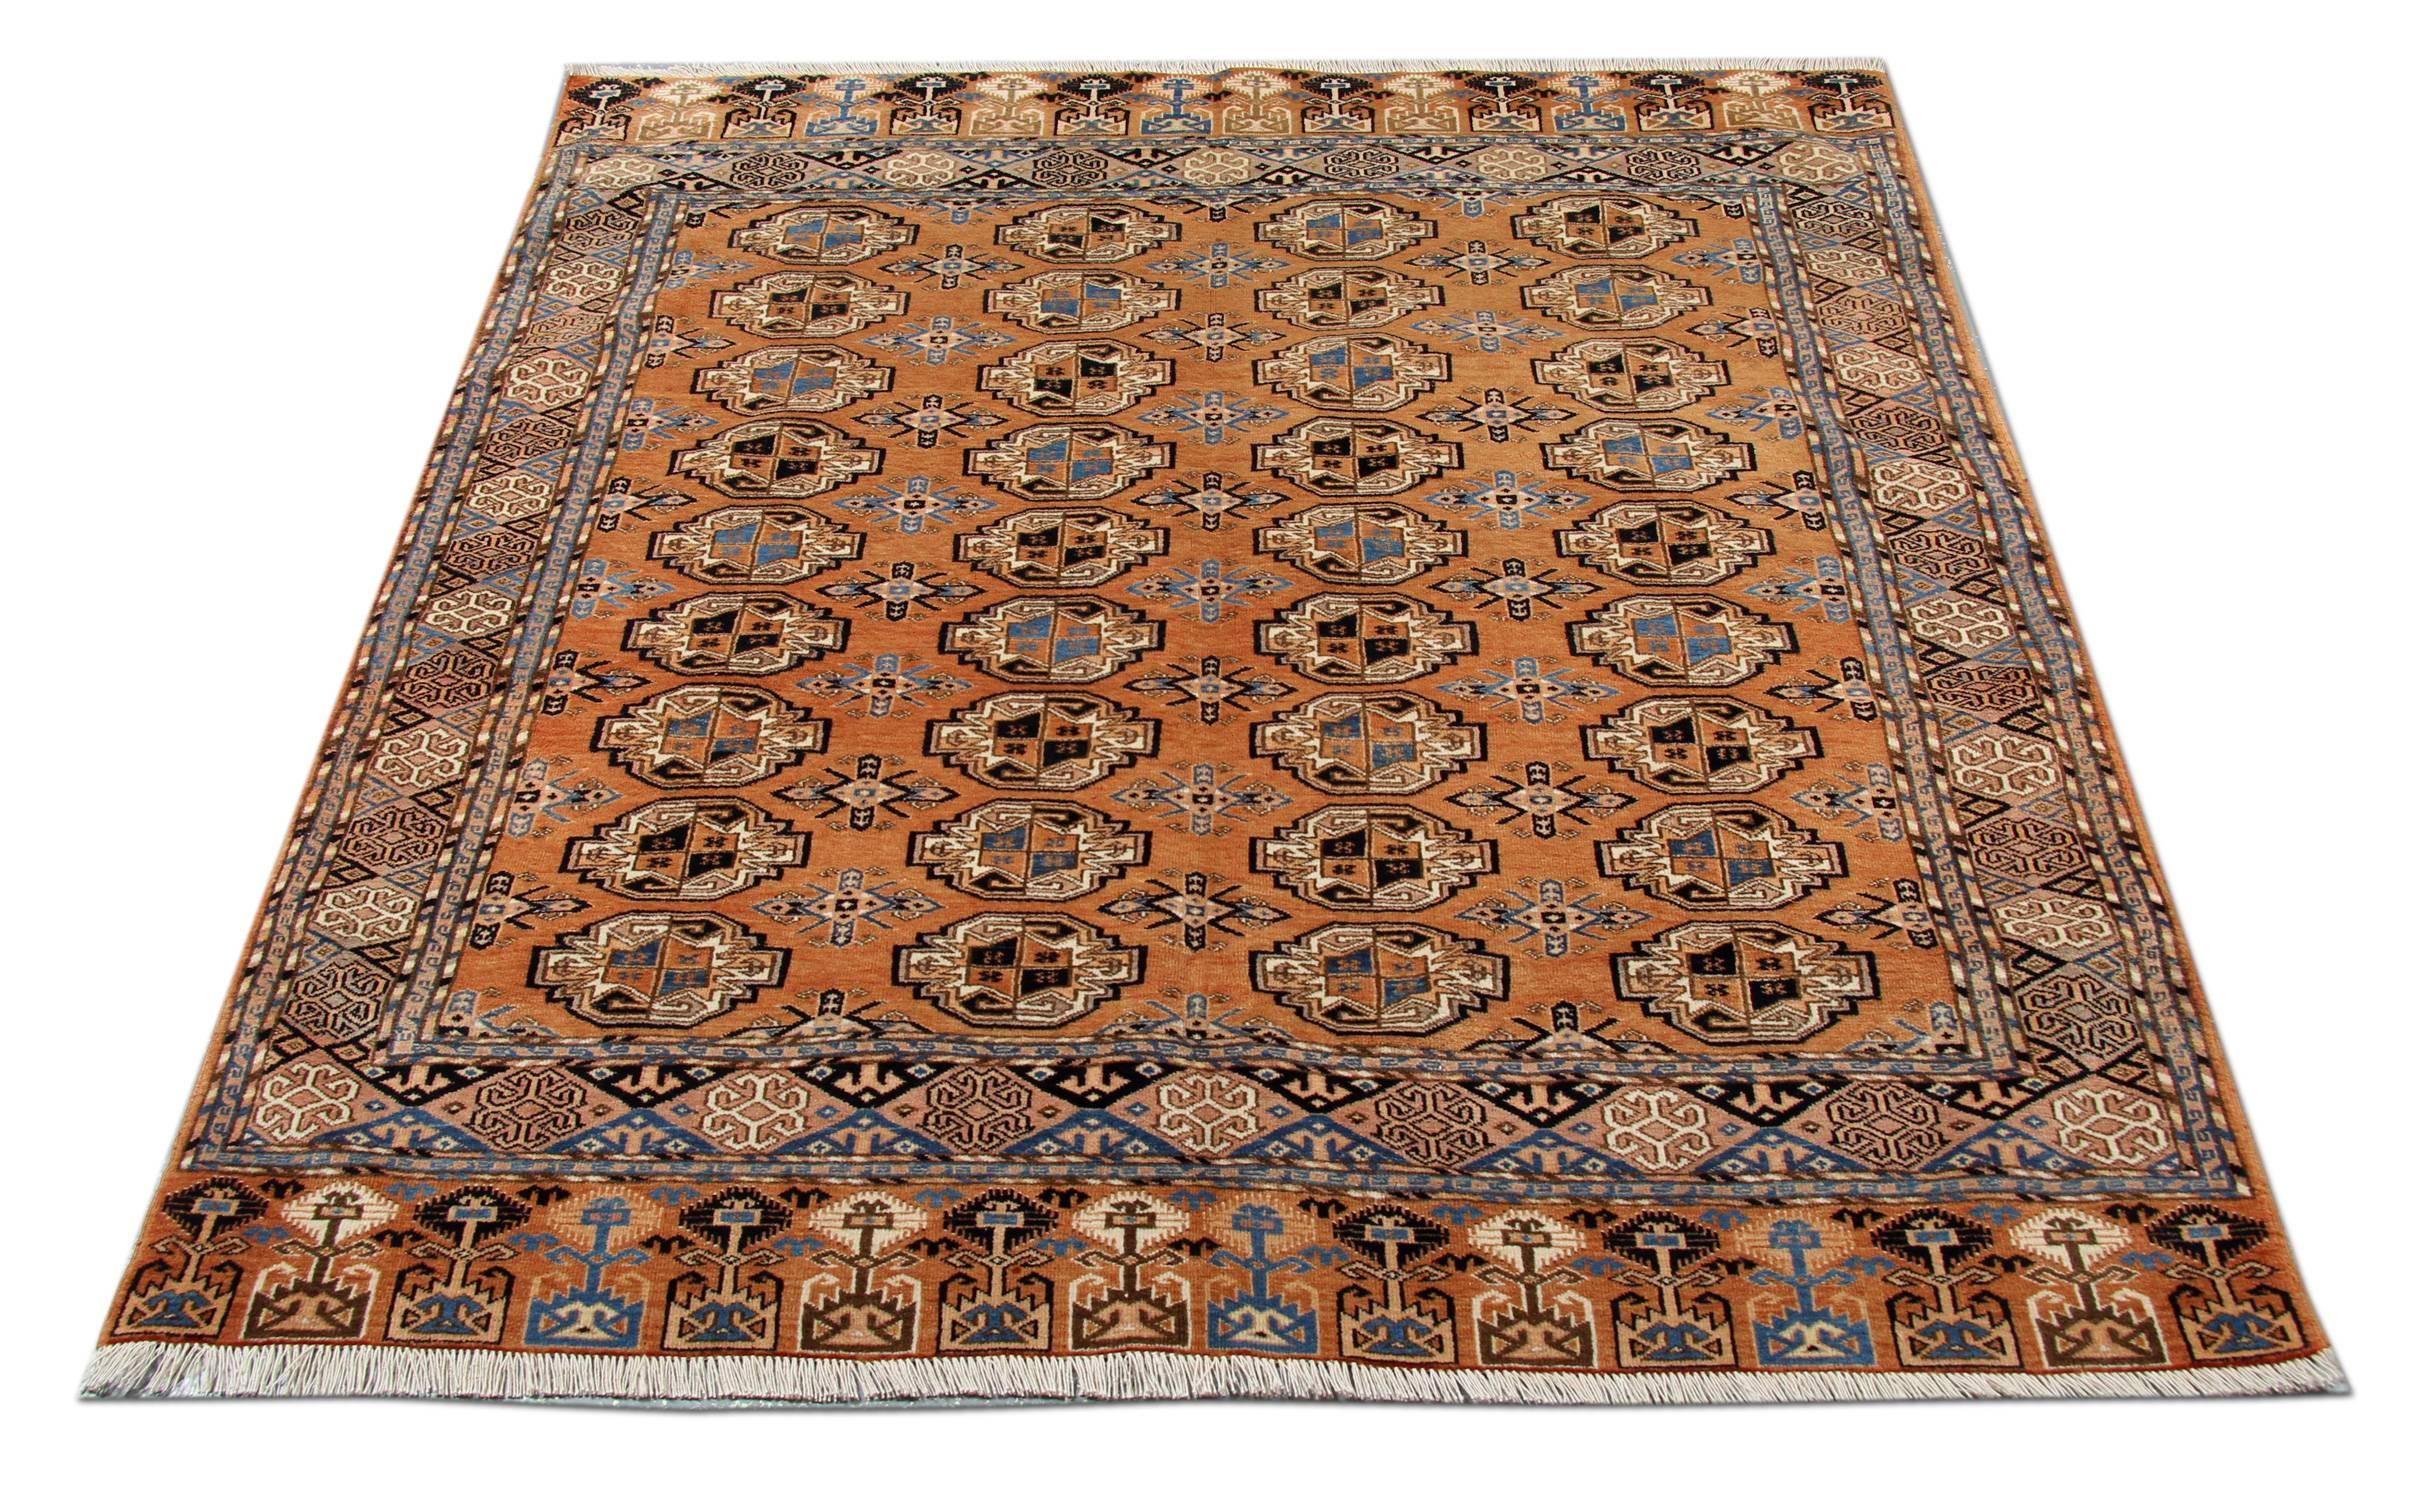 A Bokhara rug from the Caucasus region of the early 20th century with geometric gulls and polygons with a brick red background and shades of blue and beige. Tribal motifs with Classic borders.
Handmade carpet Oriental rug minimal colours have been